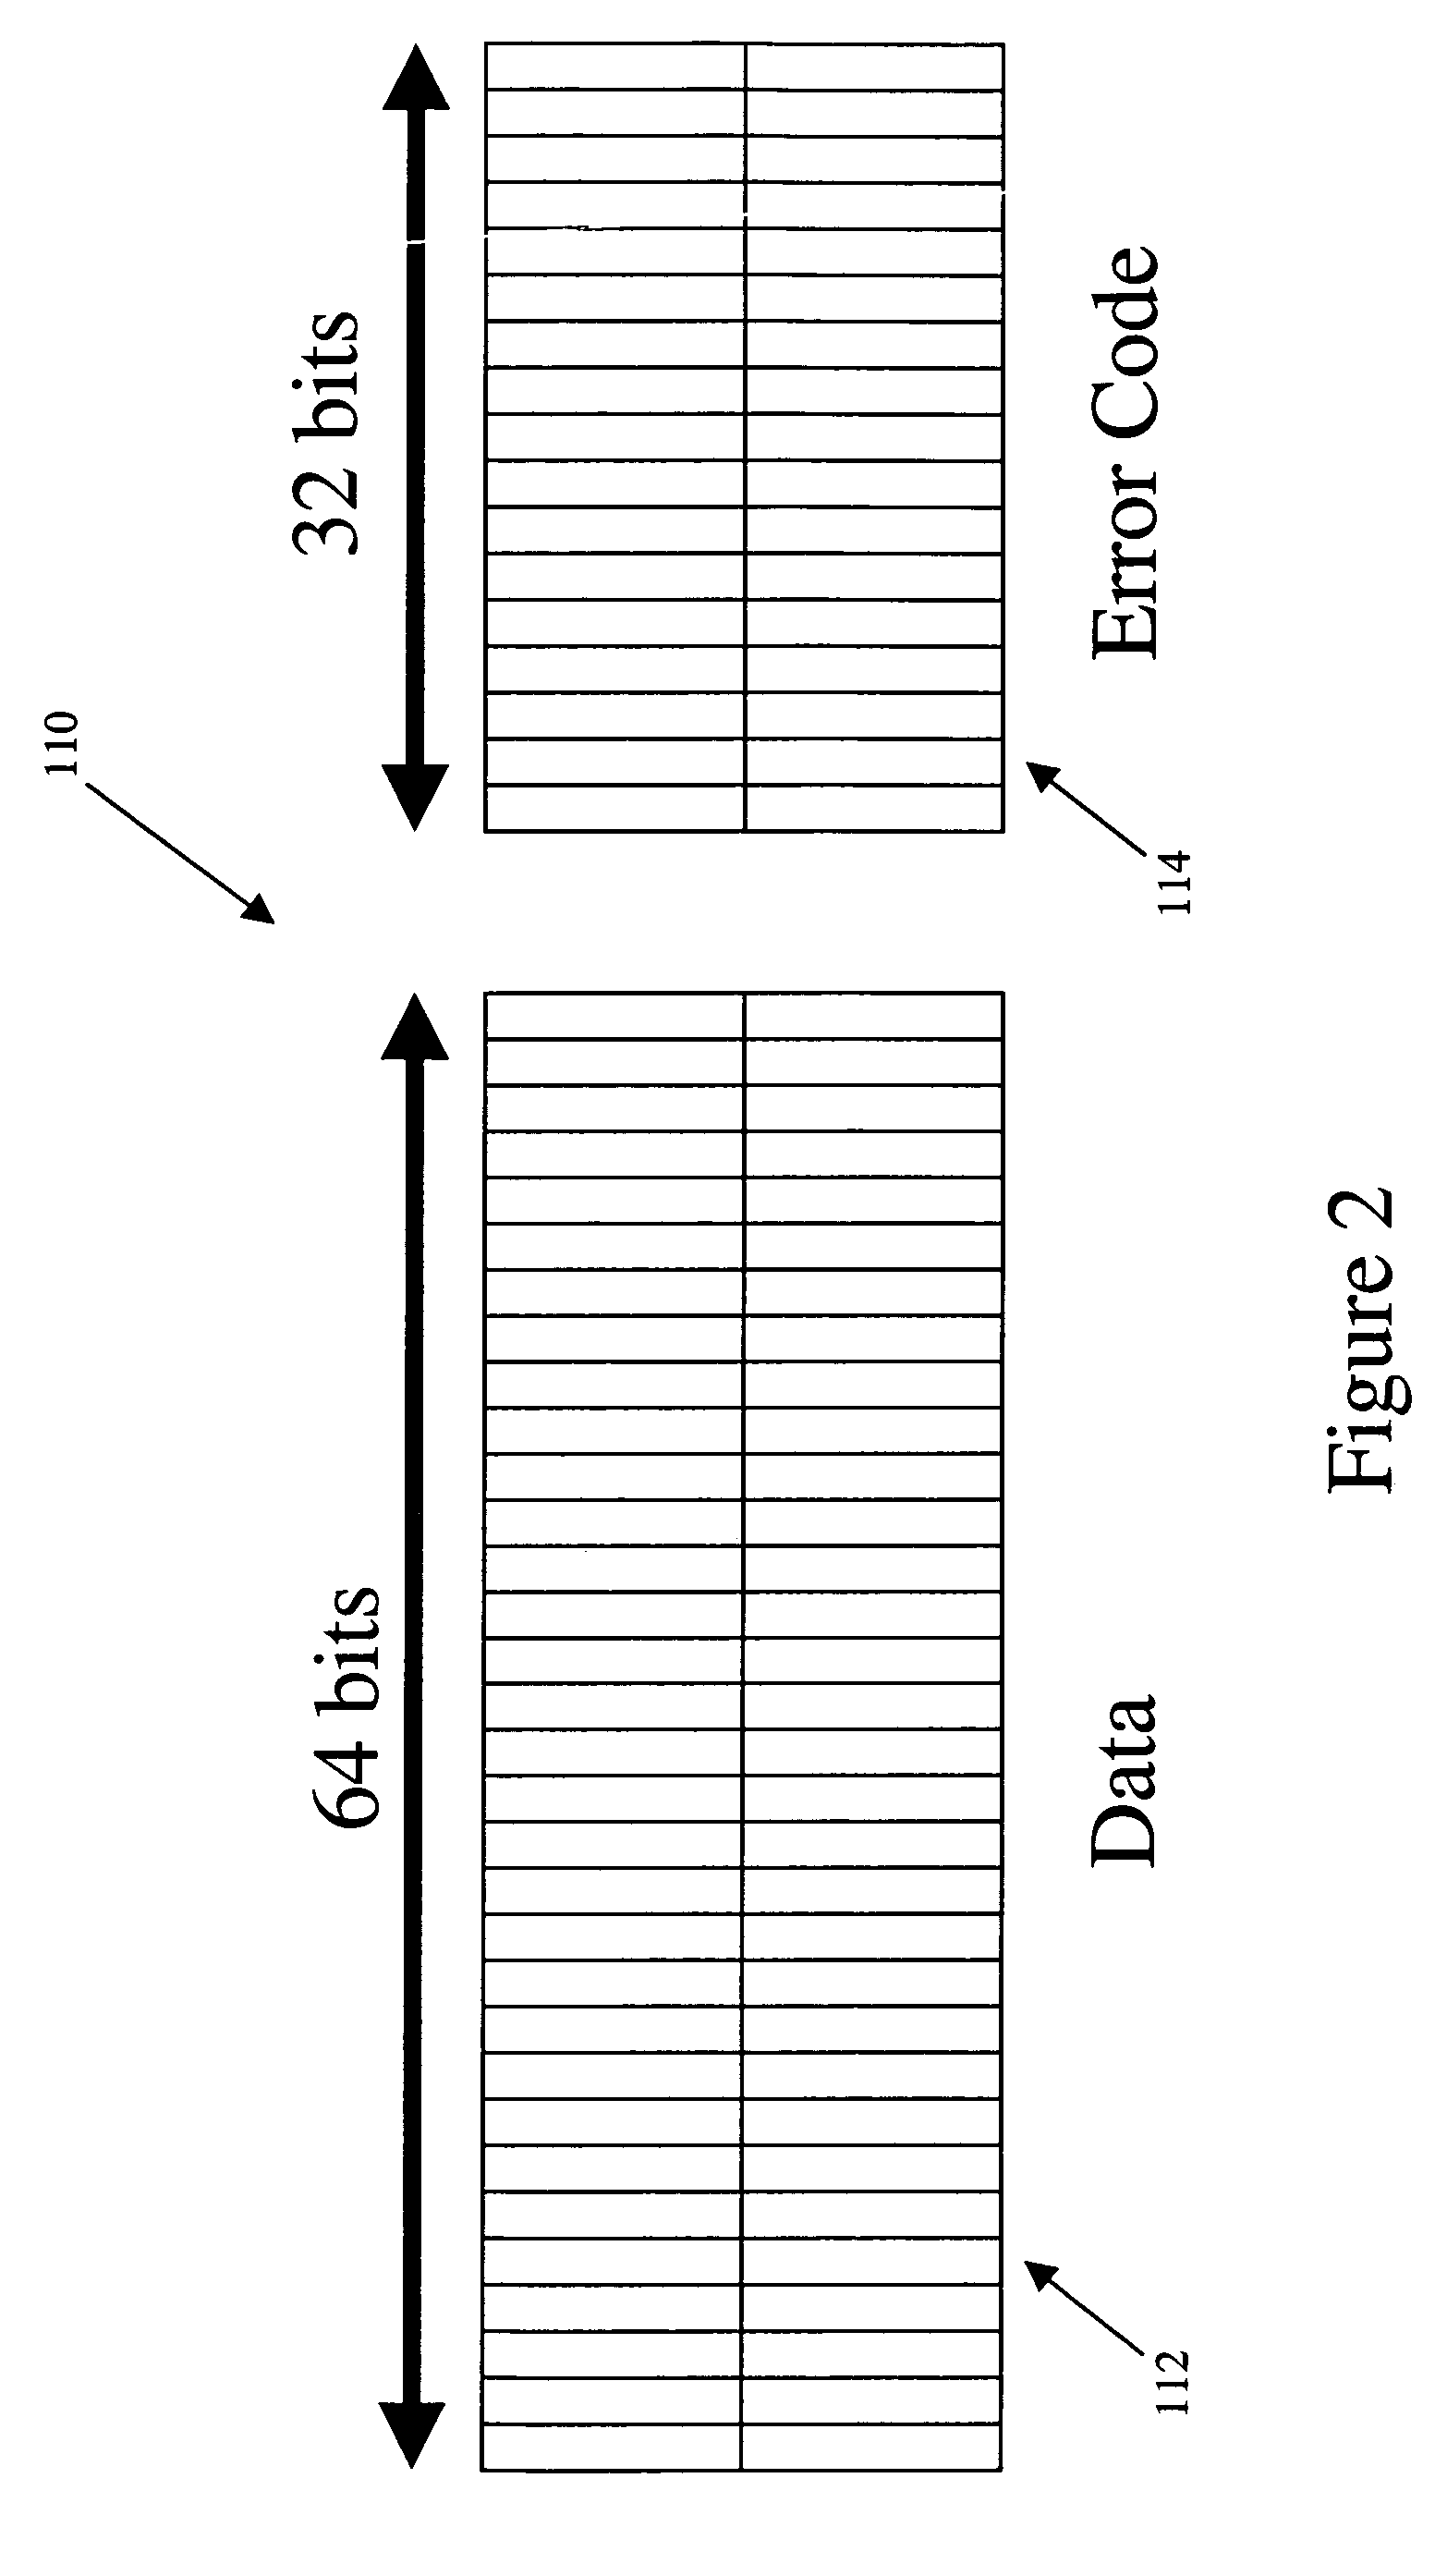 Error detection and correction method and system for memory devices